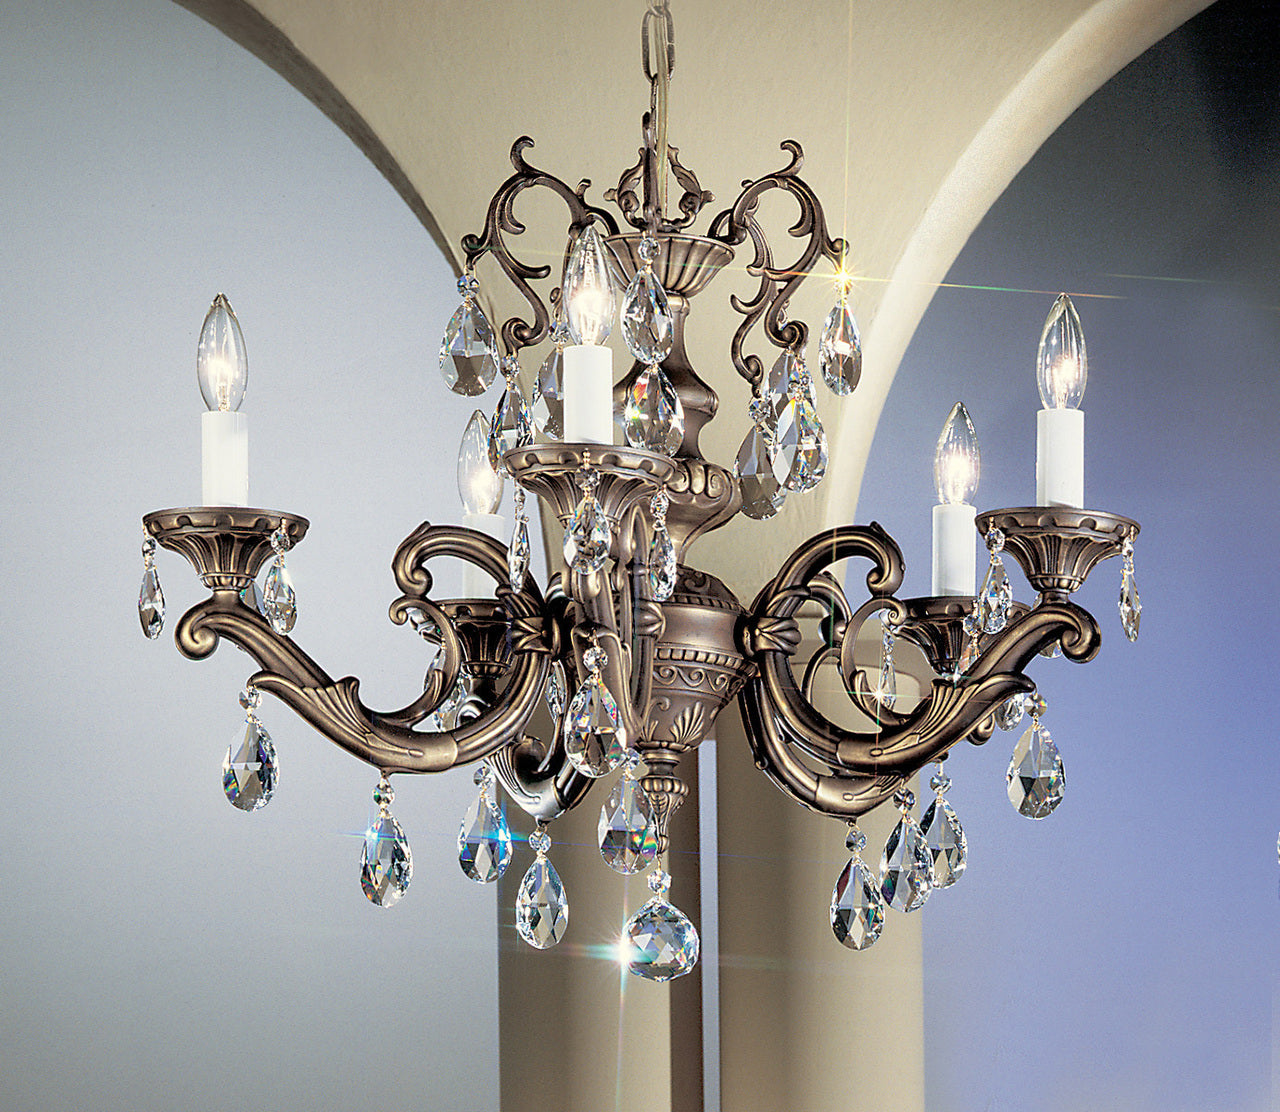 Classic Lighting 57205 RB Princeton II Cast Brass Chandelier in Roman Bronze (Imported from Spain)